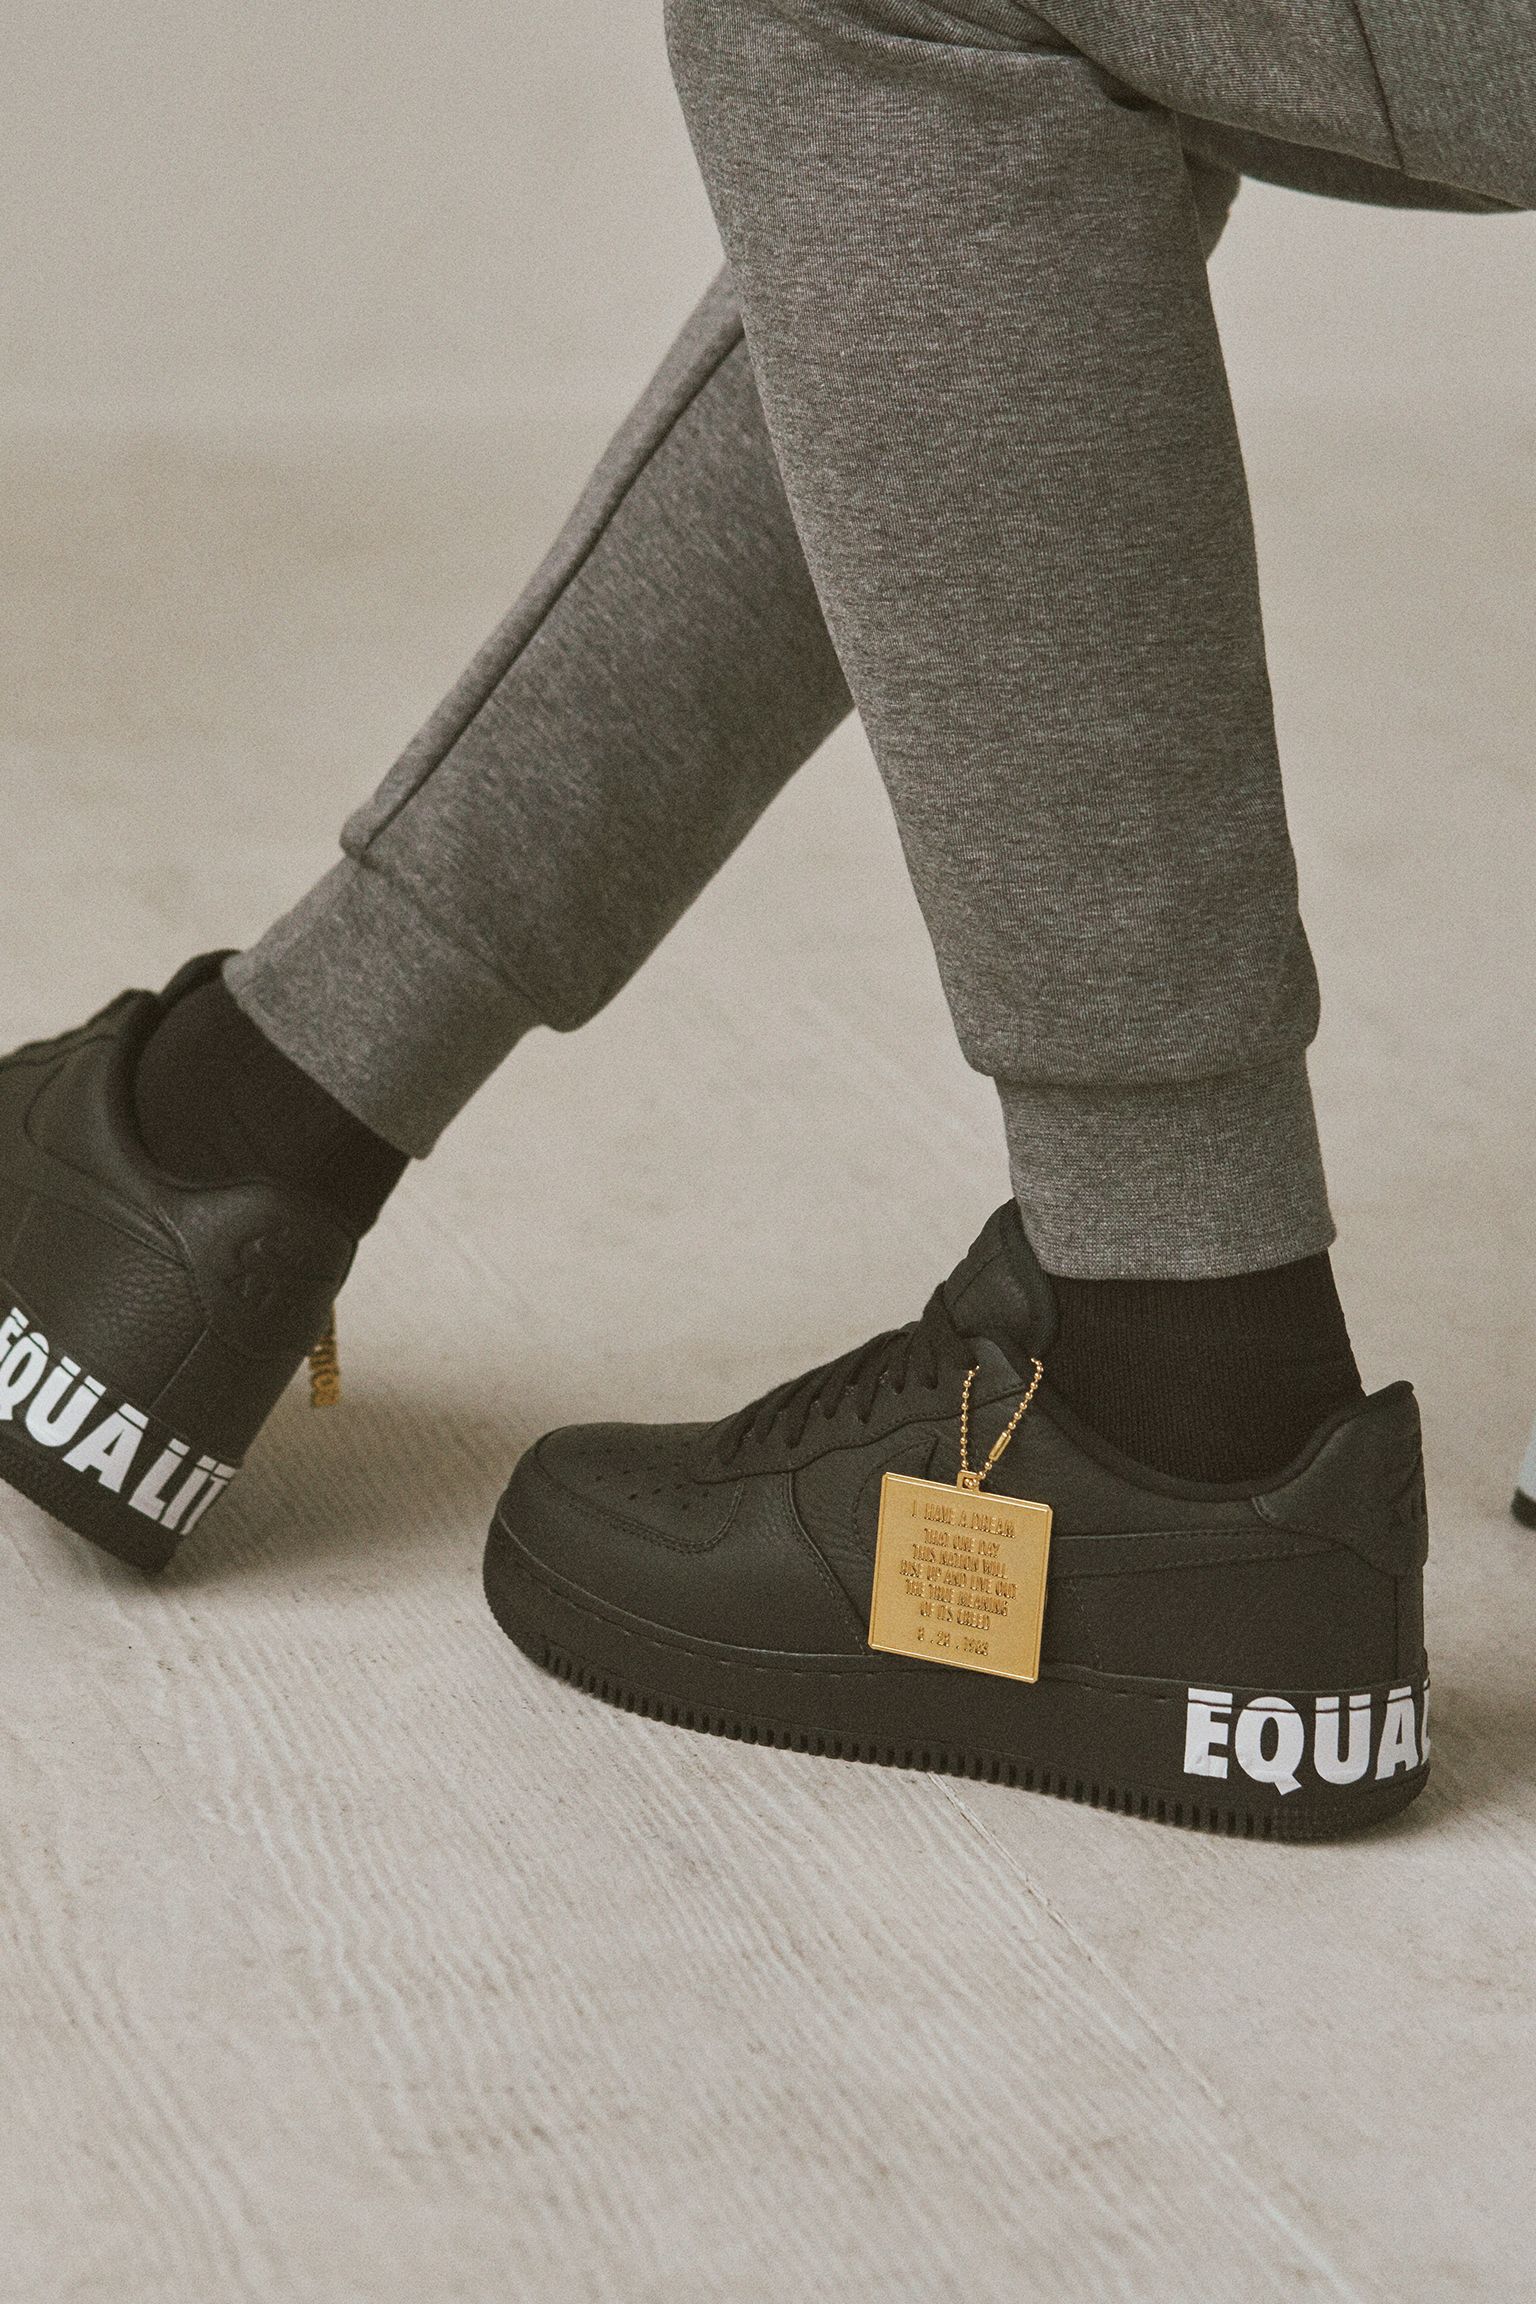 Nike Air Force 1 Low 'Equality' 2018 Release Date. Nike SNKRS